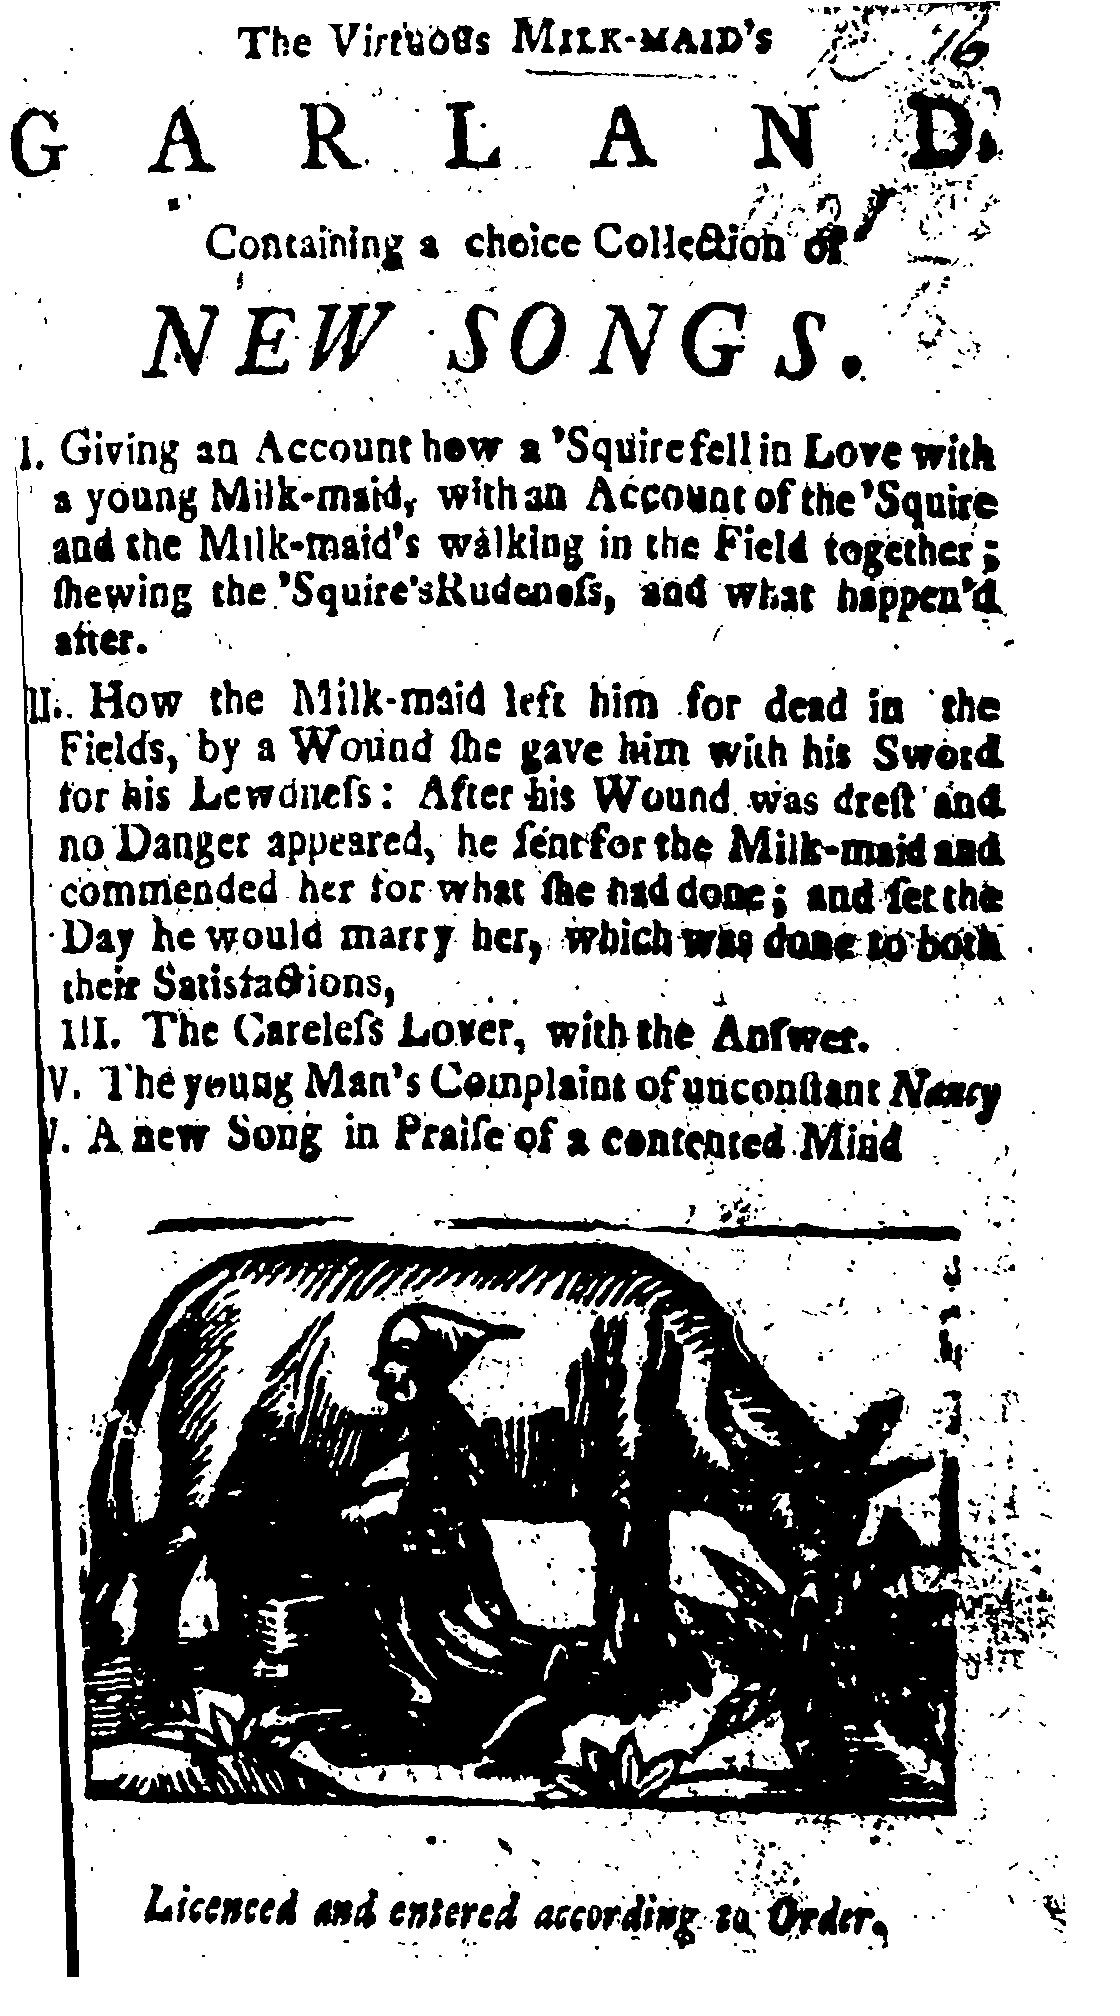 Black and white image of the front page of a ballad sheet, with the title "The Virtuous Milk-Maid's Garland, Containing a choice Collection of New Songs" the contents include an account of "how a Squire fell in Love with a young Milk-maid... shewing the Squire's Rudeness, and what happened after" and "How the Milk-maid left him for dead in the Fields, by a Wound she gave him with his Sword for his Lewdness: After his Wound was drest and no Danger appeared, he sent for the Milk-maid and commended her for what she had done; and set the Day he would marry her, which was done to both their Satisfactions." At the bottom is a woodcut image of a woman milking a cow. 